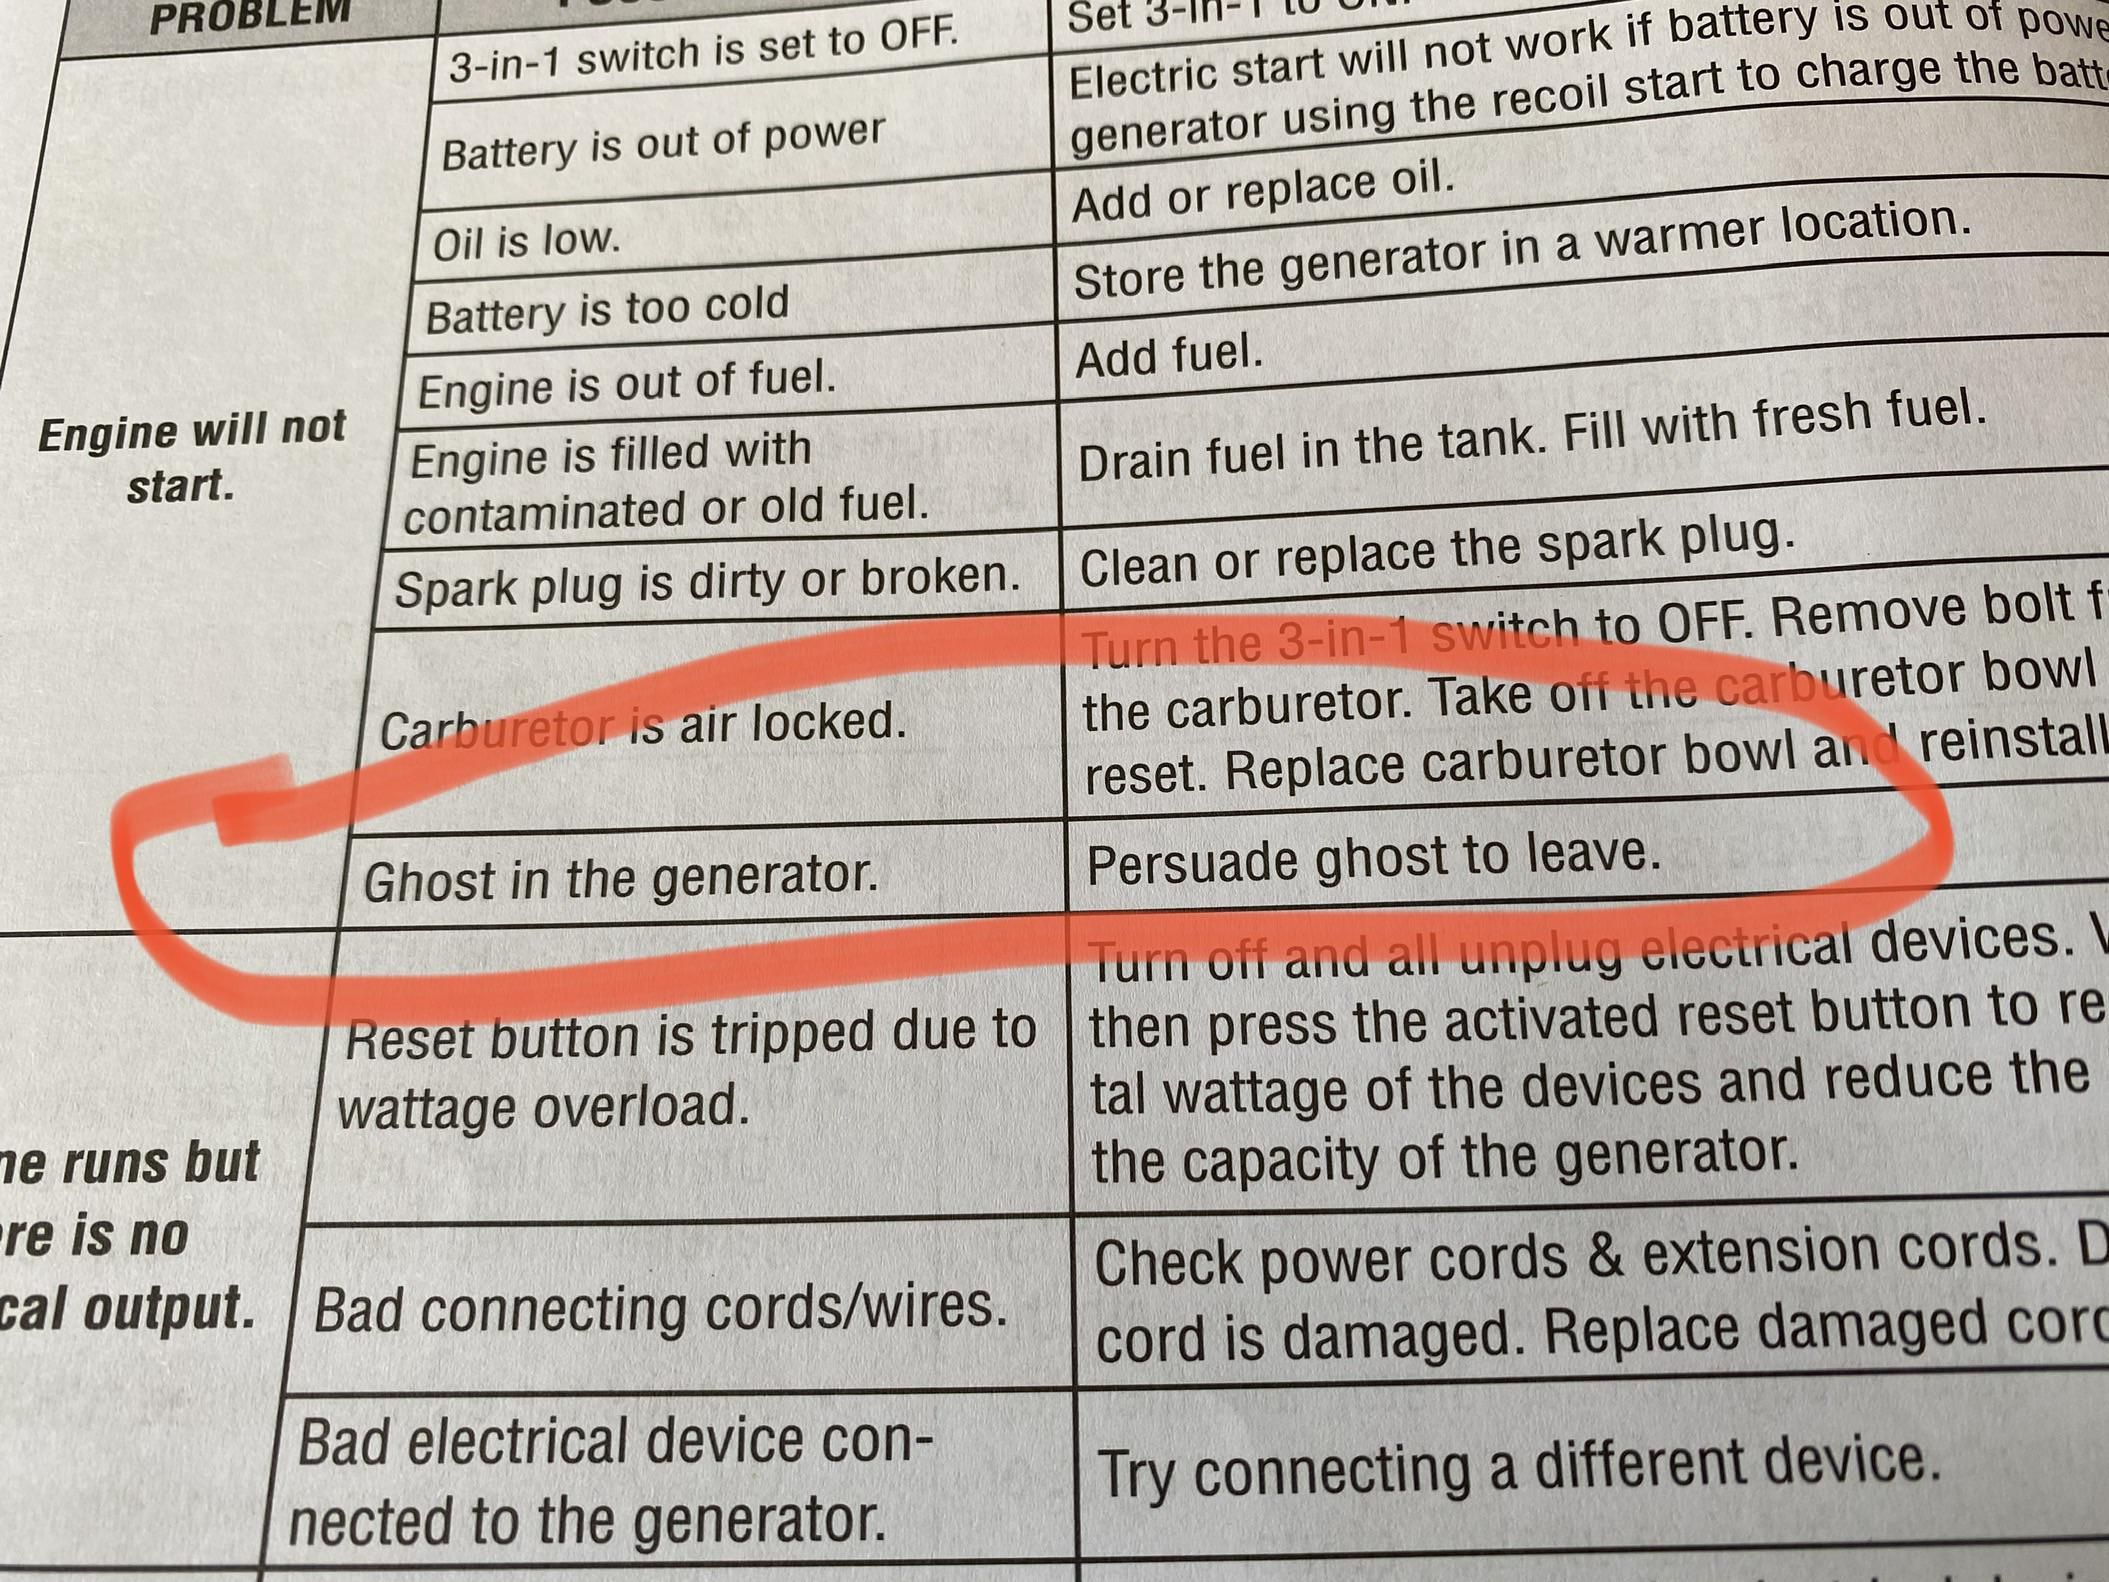 Bought a new generator and thoroughly reading the instructions.